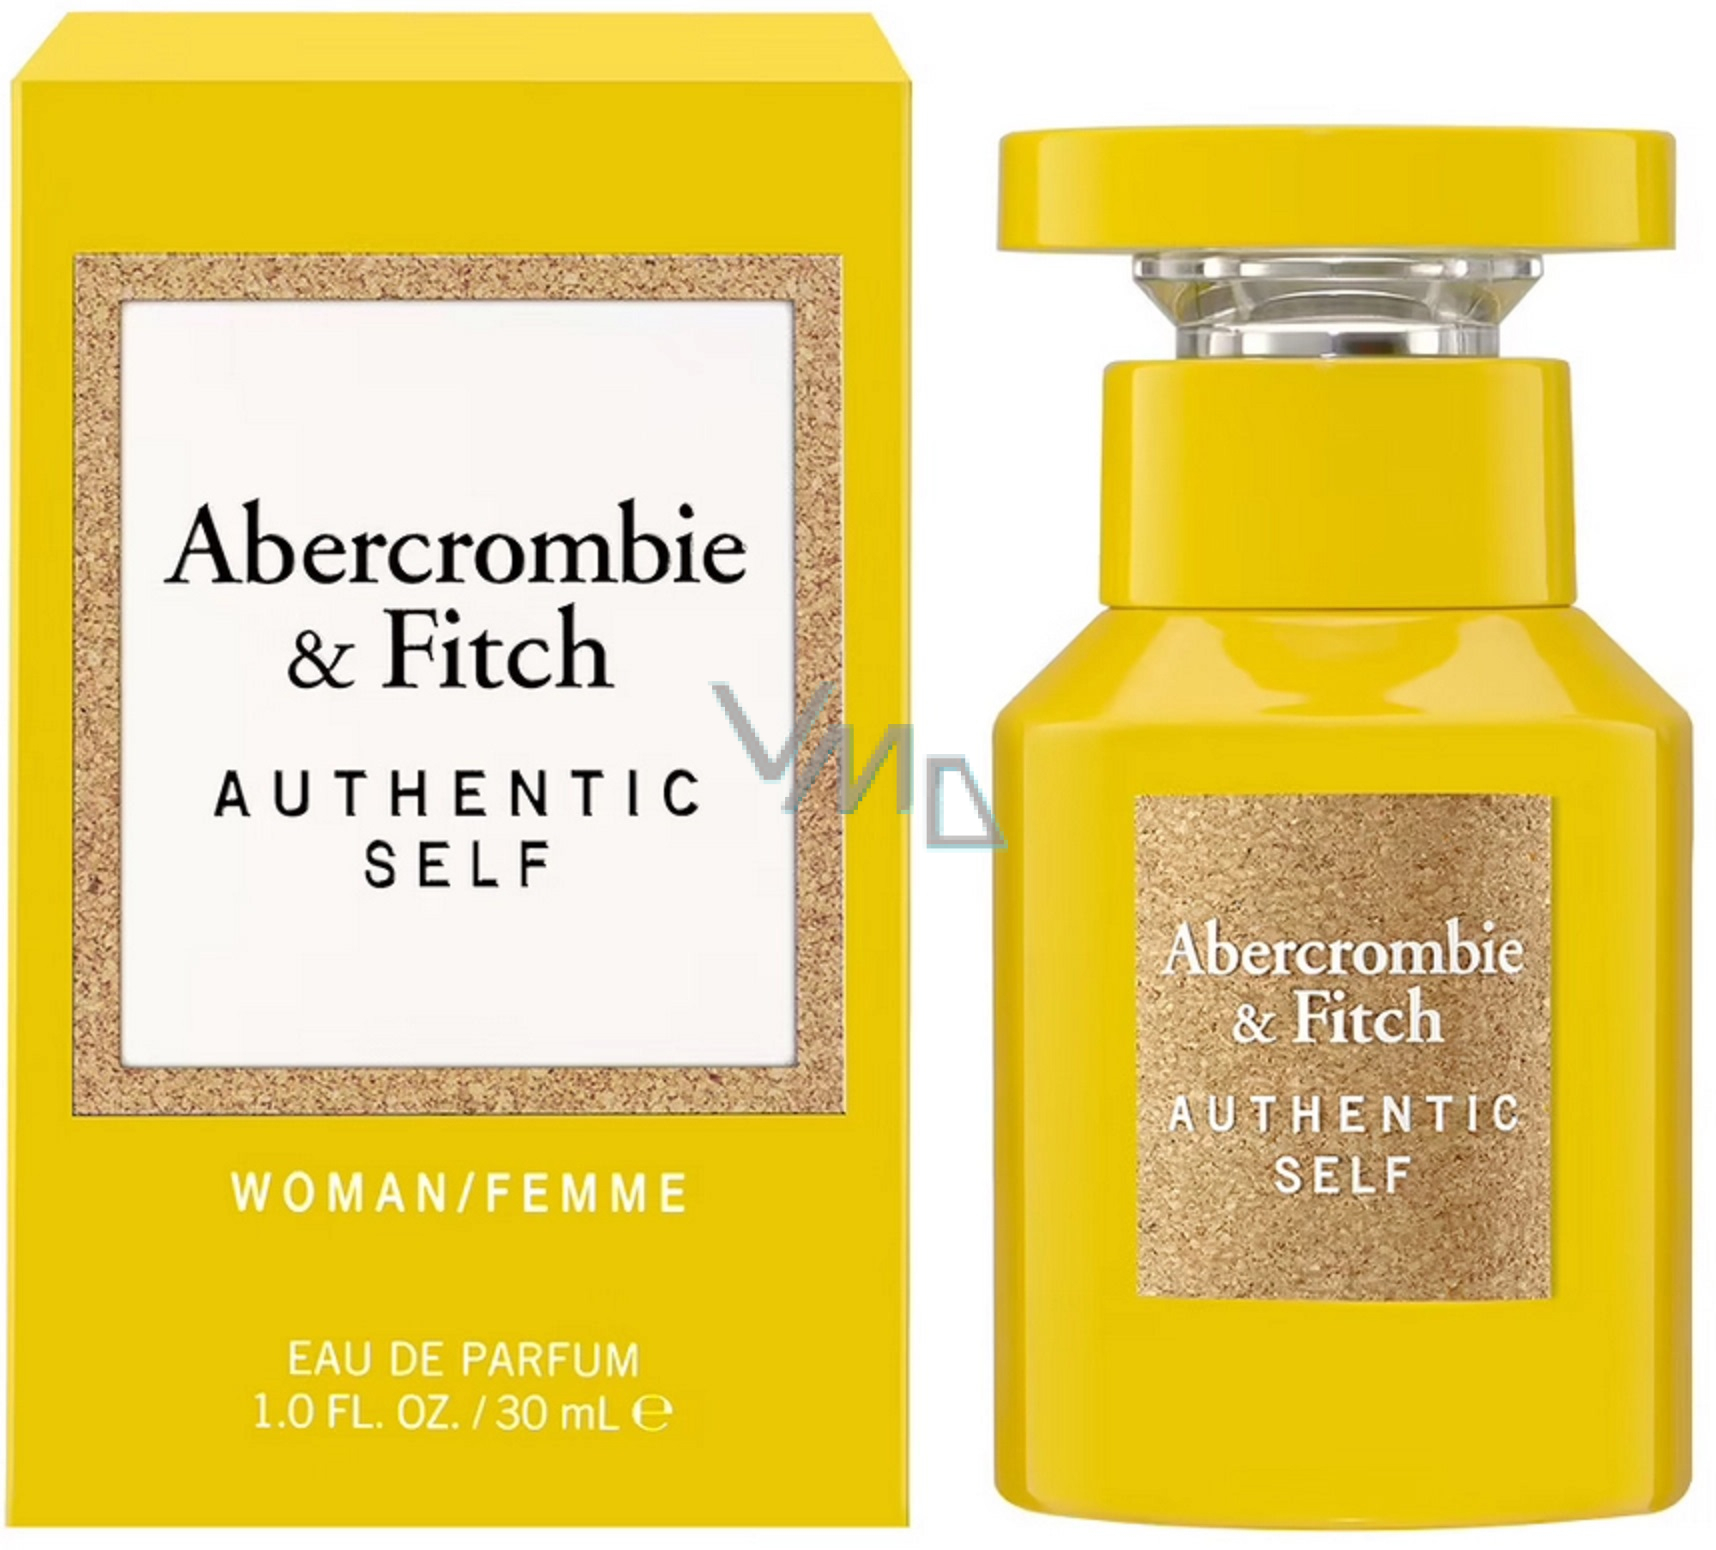 Abercrombie fitch authentic women парфюмерная вода. Духи Abercrombie Fitch authentic 30 мл. Духи Abercrombie Fitch authentic women. Abercrombie Fitch authentic self духи женские. Abercrombie & Fitch - authentic self man.